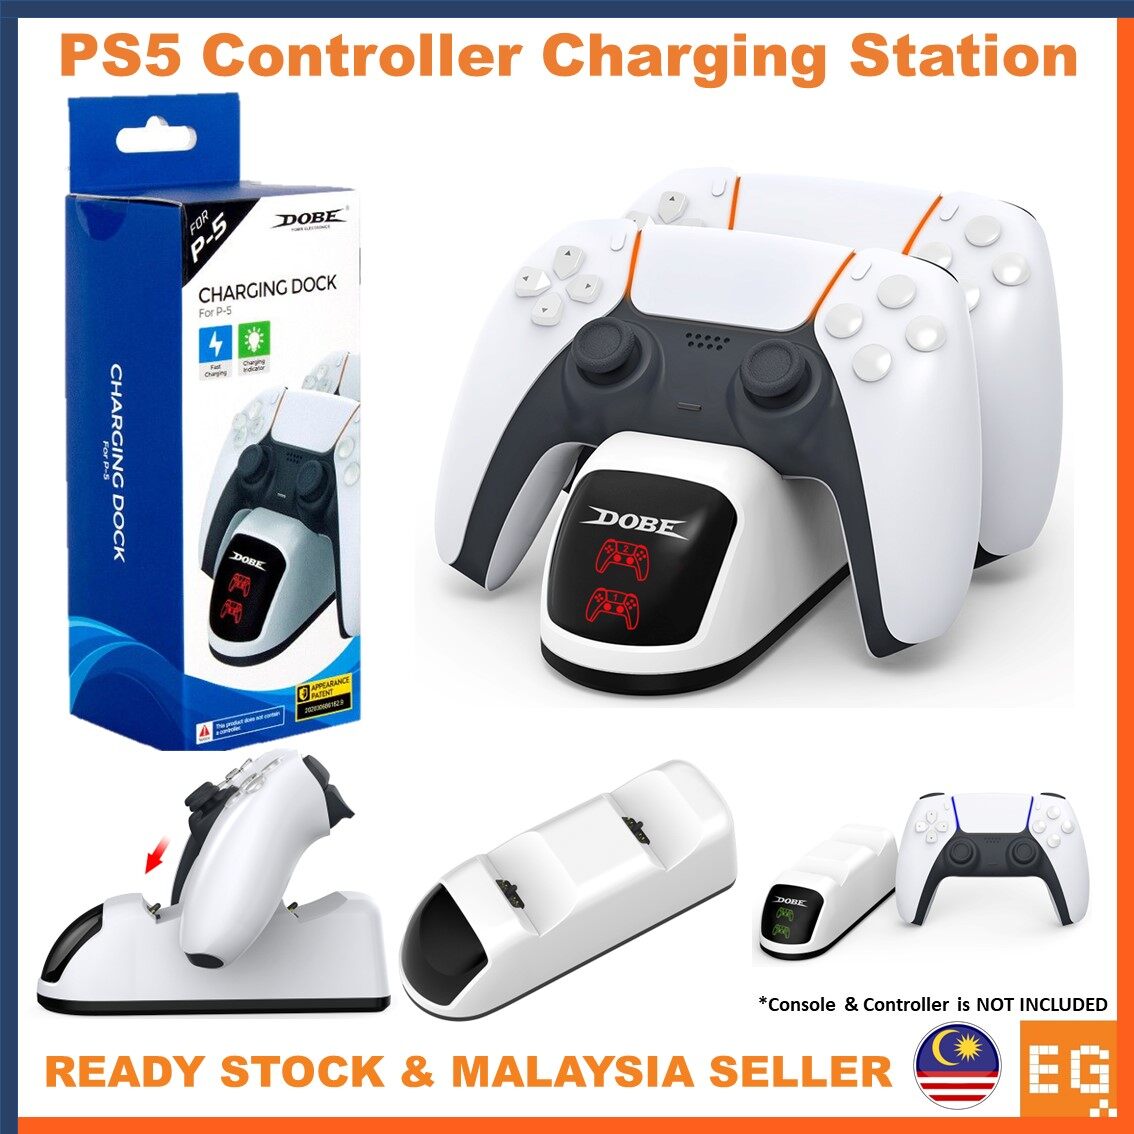 PS5 Controller Charger Dualsense Charging Station Dock Fast Charge DOBE TP5-0515B